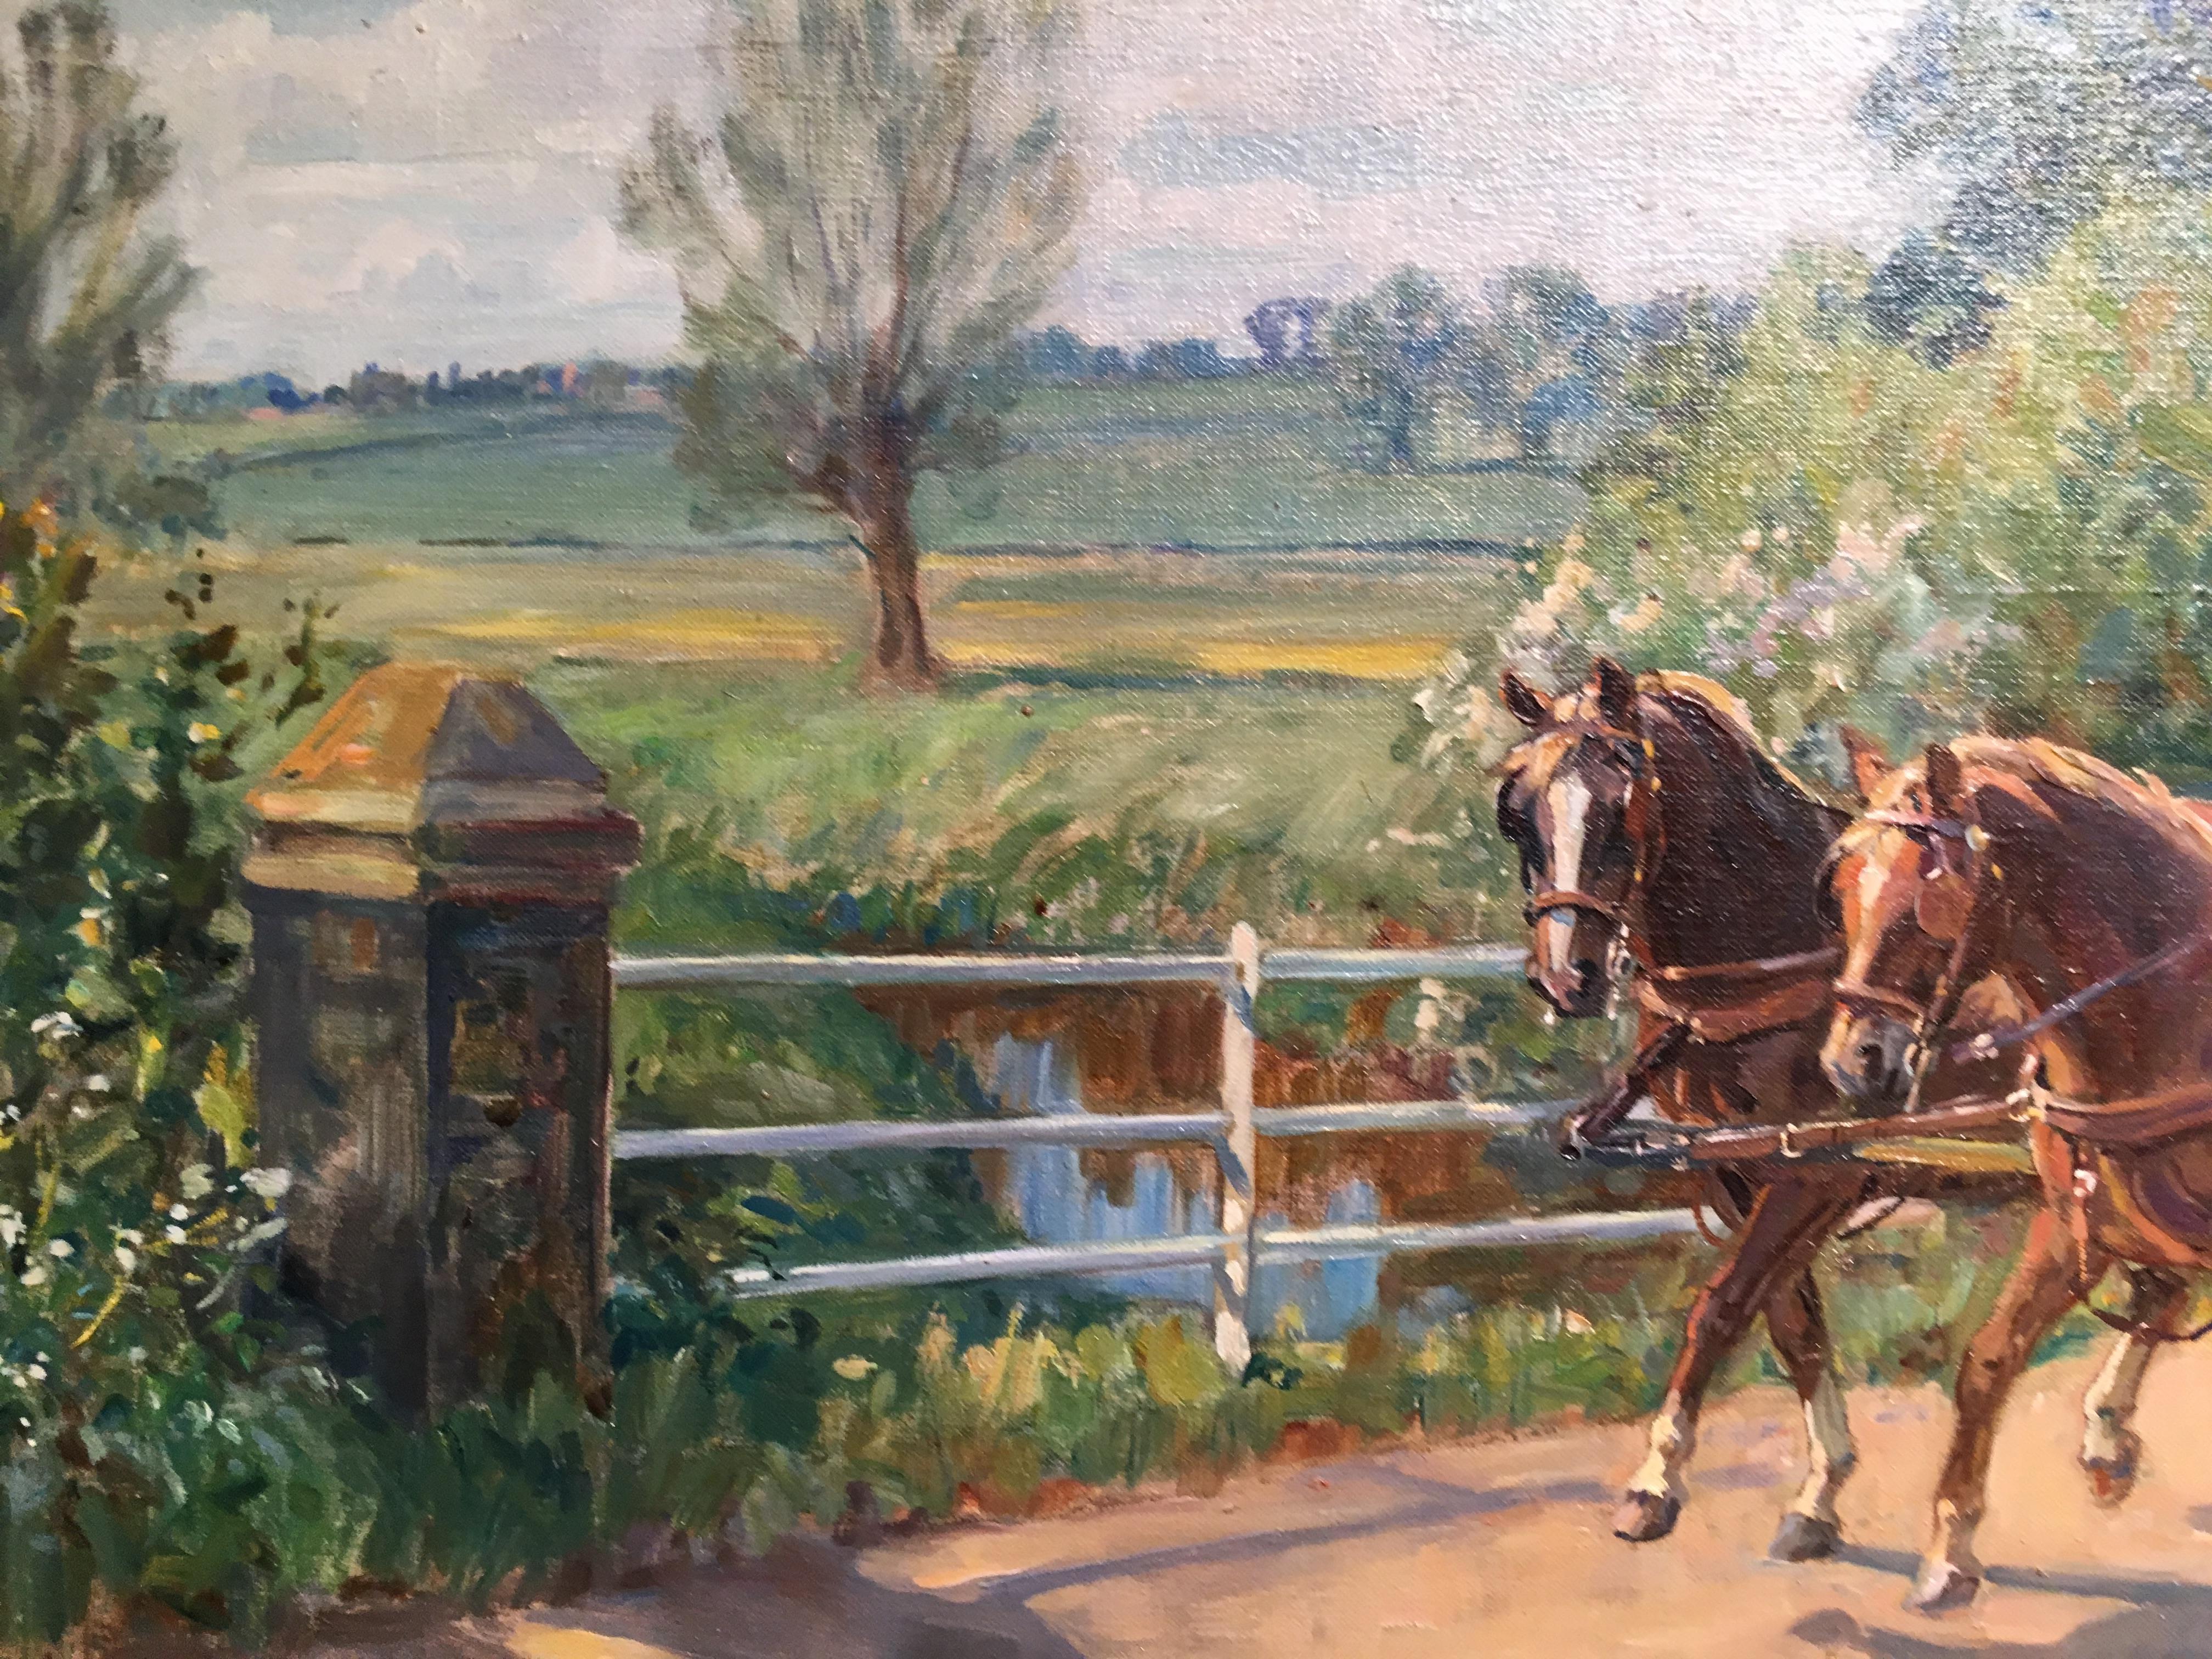 English lady in a horse drawn buggy trotting through an Impressionist landscape - Painting by Lionel Edwards